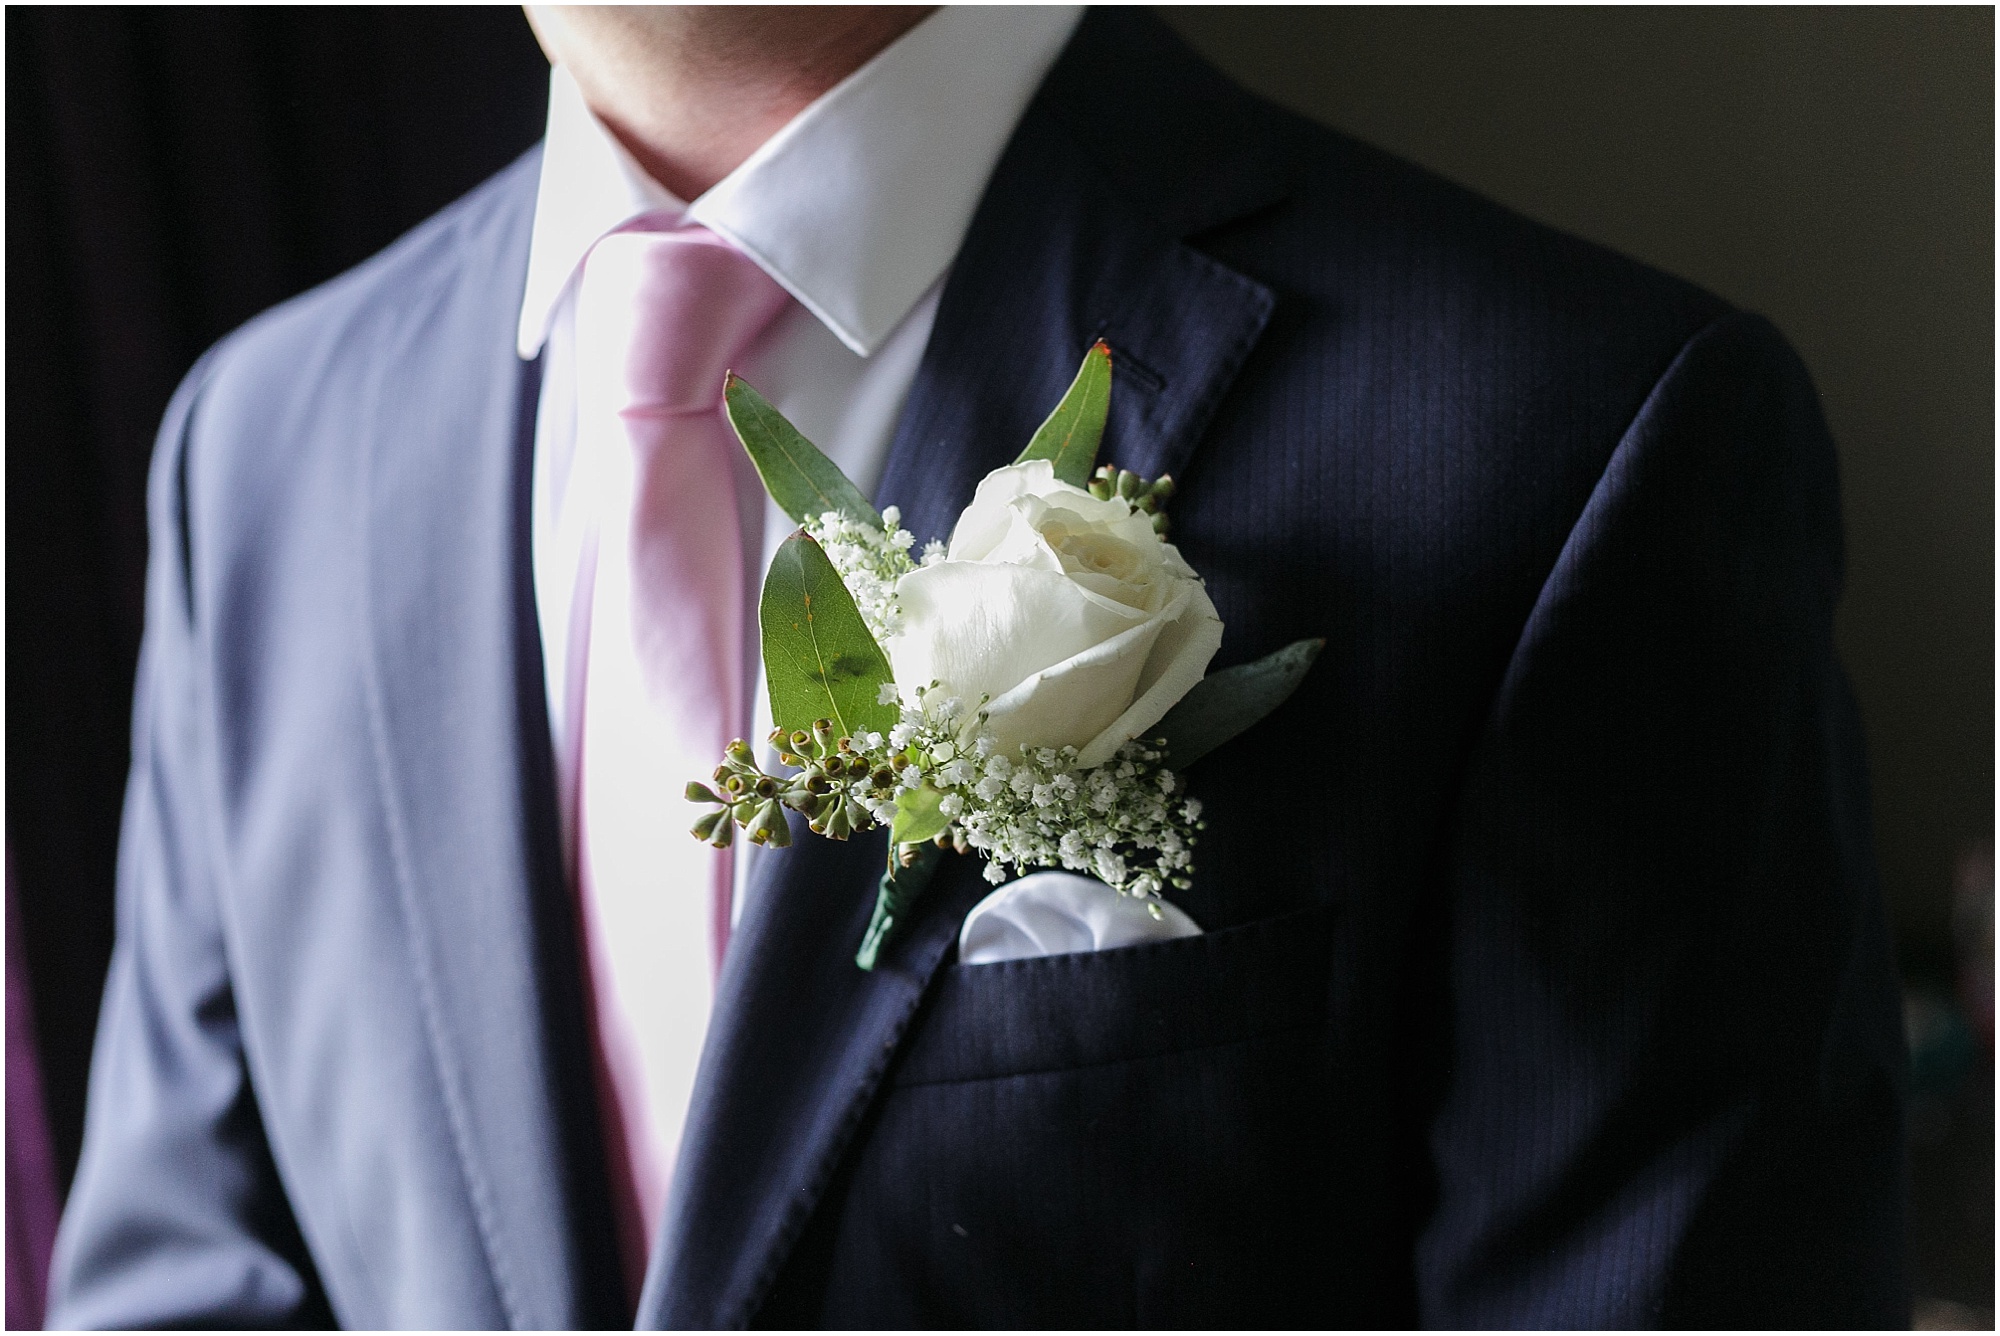 Close shot of the groom wearing a pink tie and a boutonniere made of a single while rose and baby's breath. 